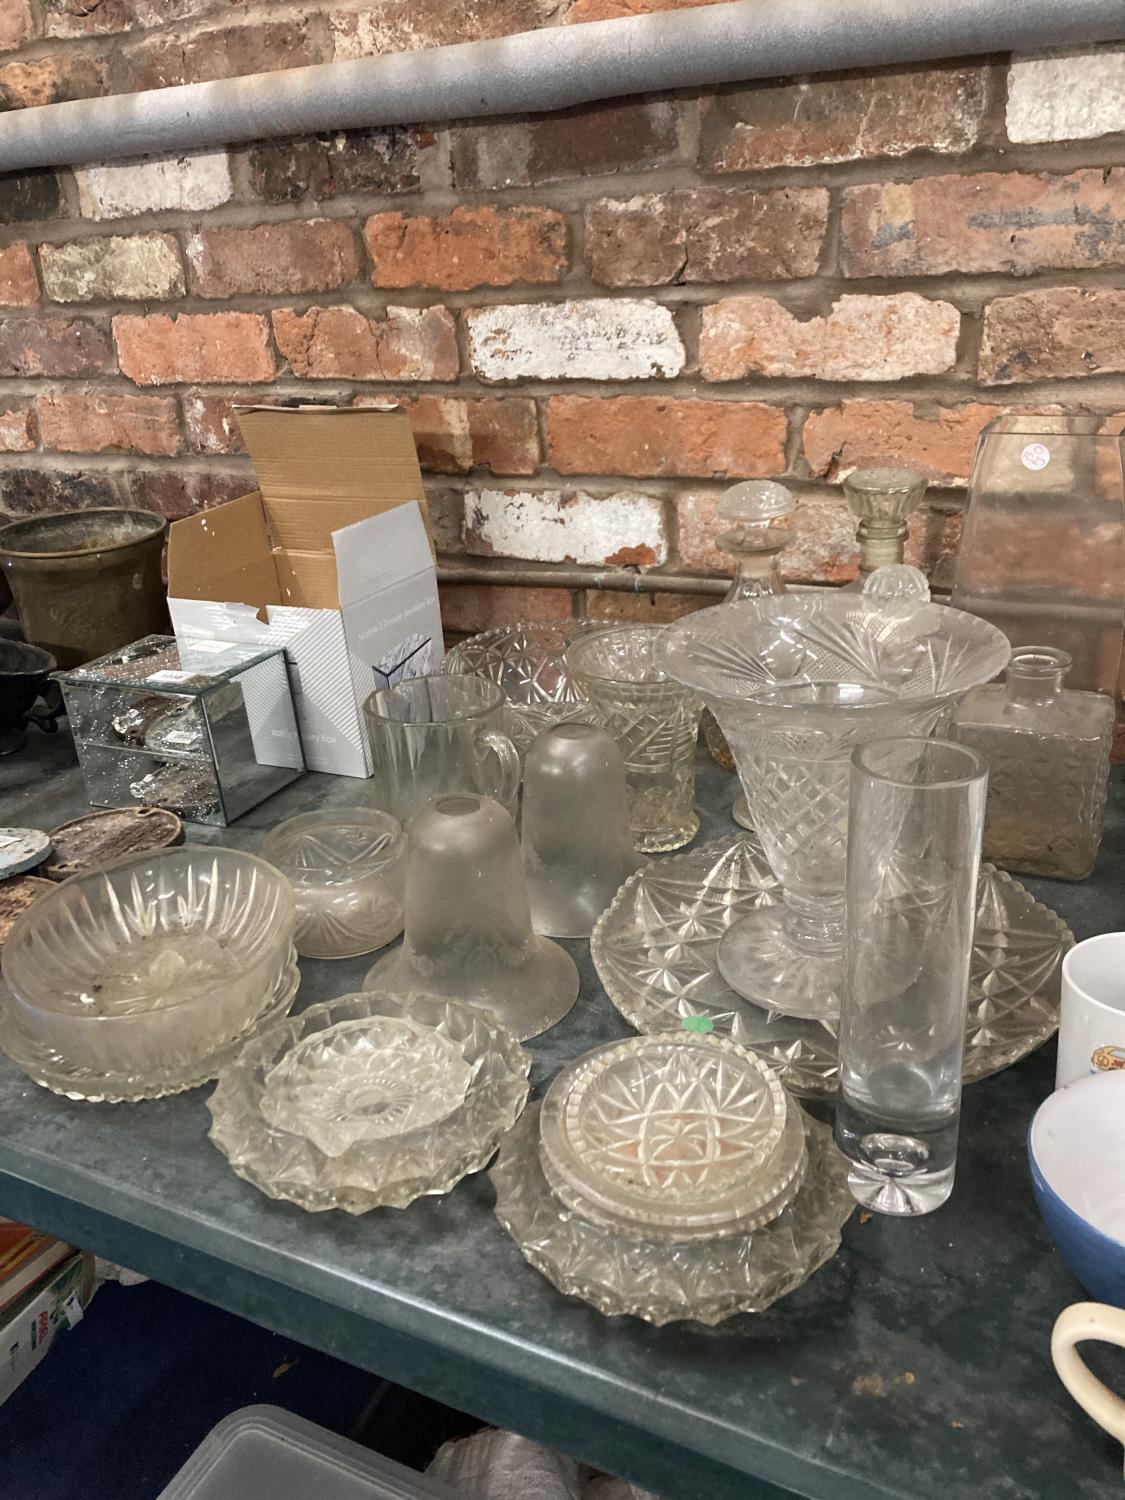 A LARGE QUANTITY OF VINTAGE GLASSWARE TO INCLUDE DECANTERS, VASES, BOWLS, LAMP SHADES, ETC - Image 3 of 4